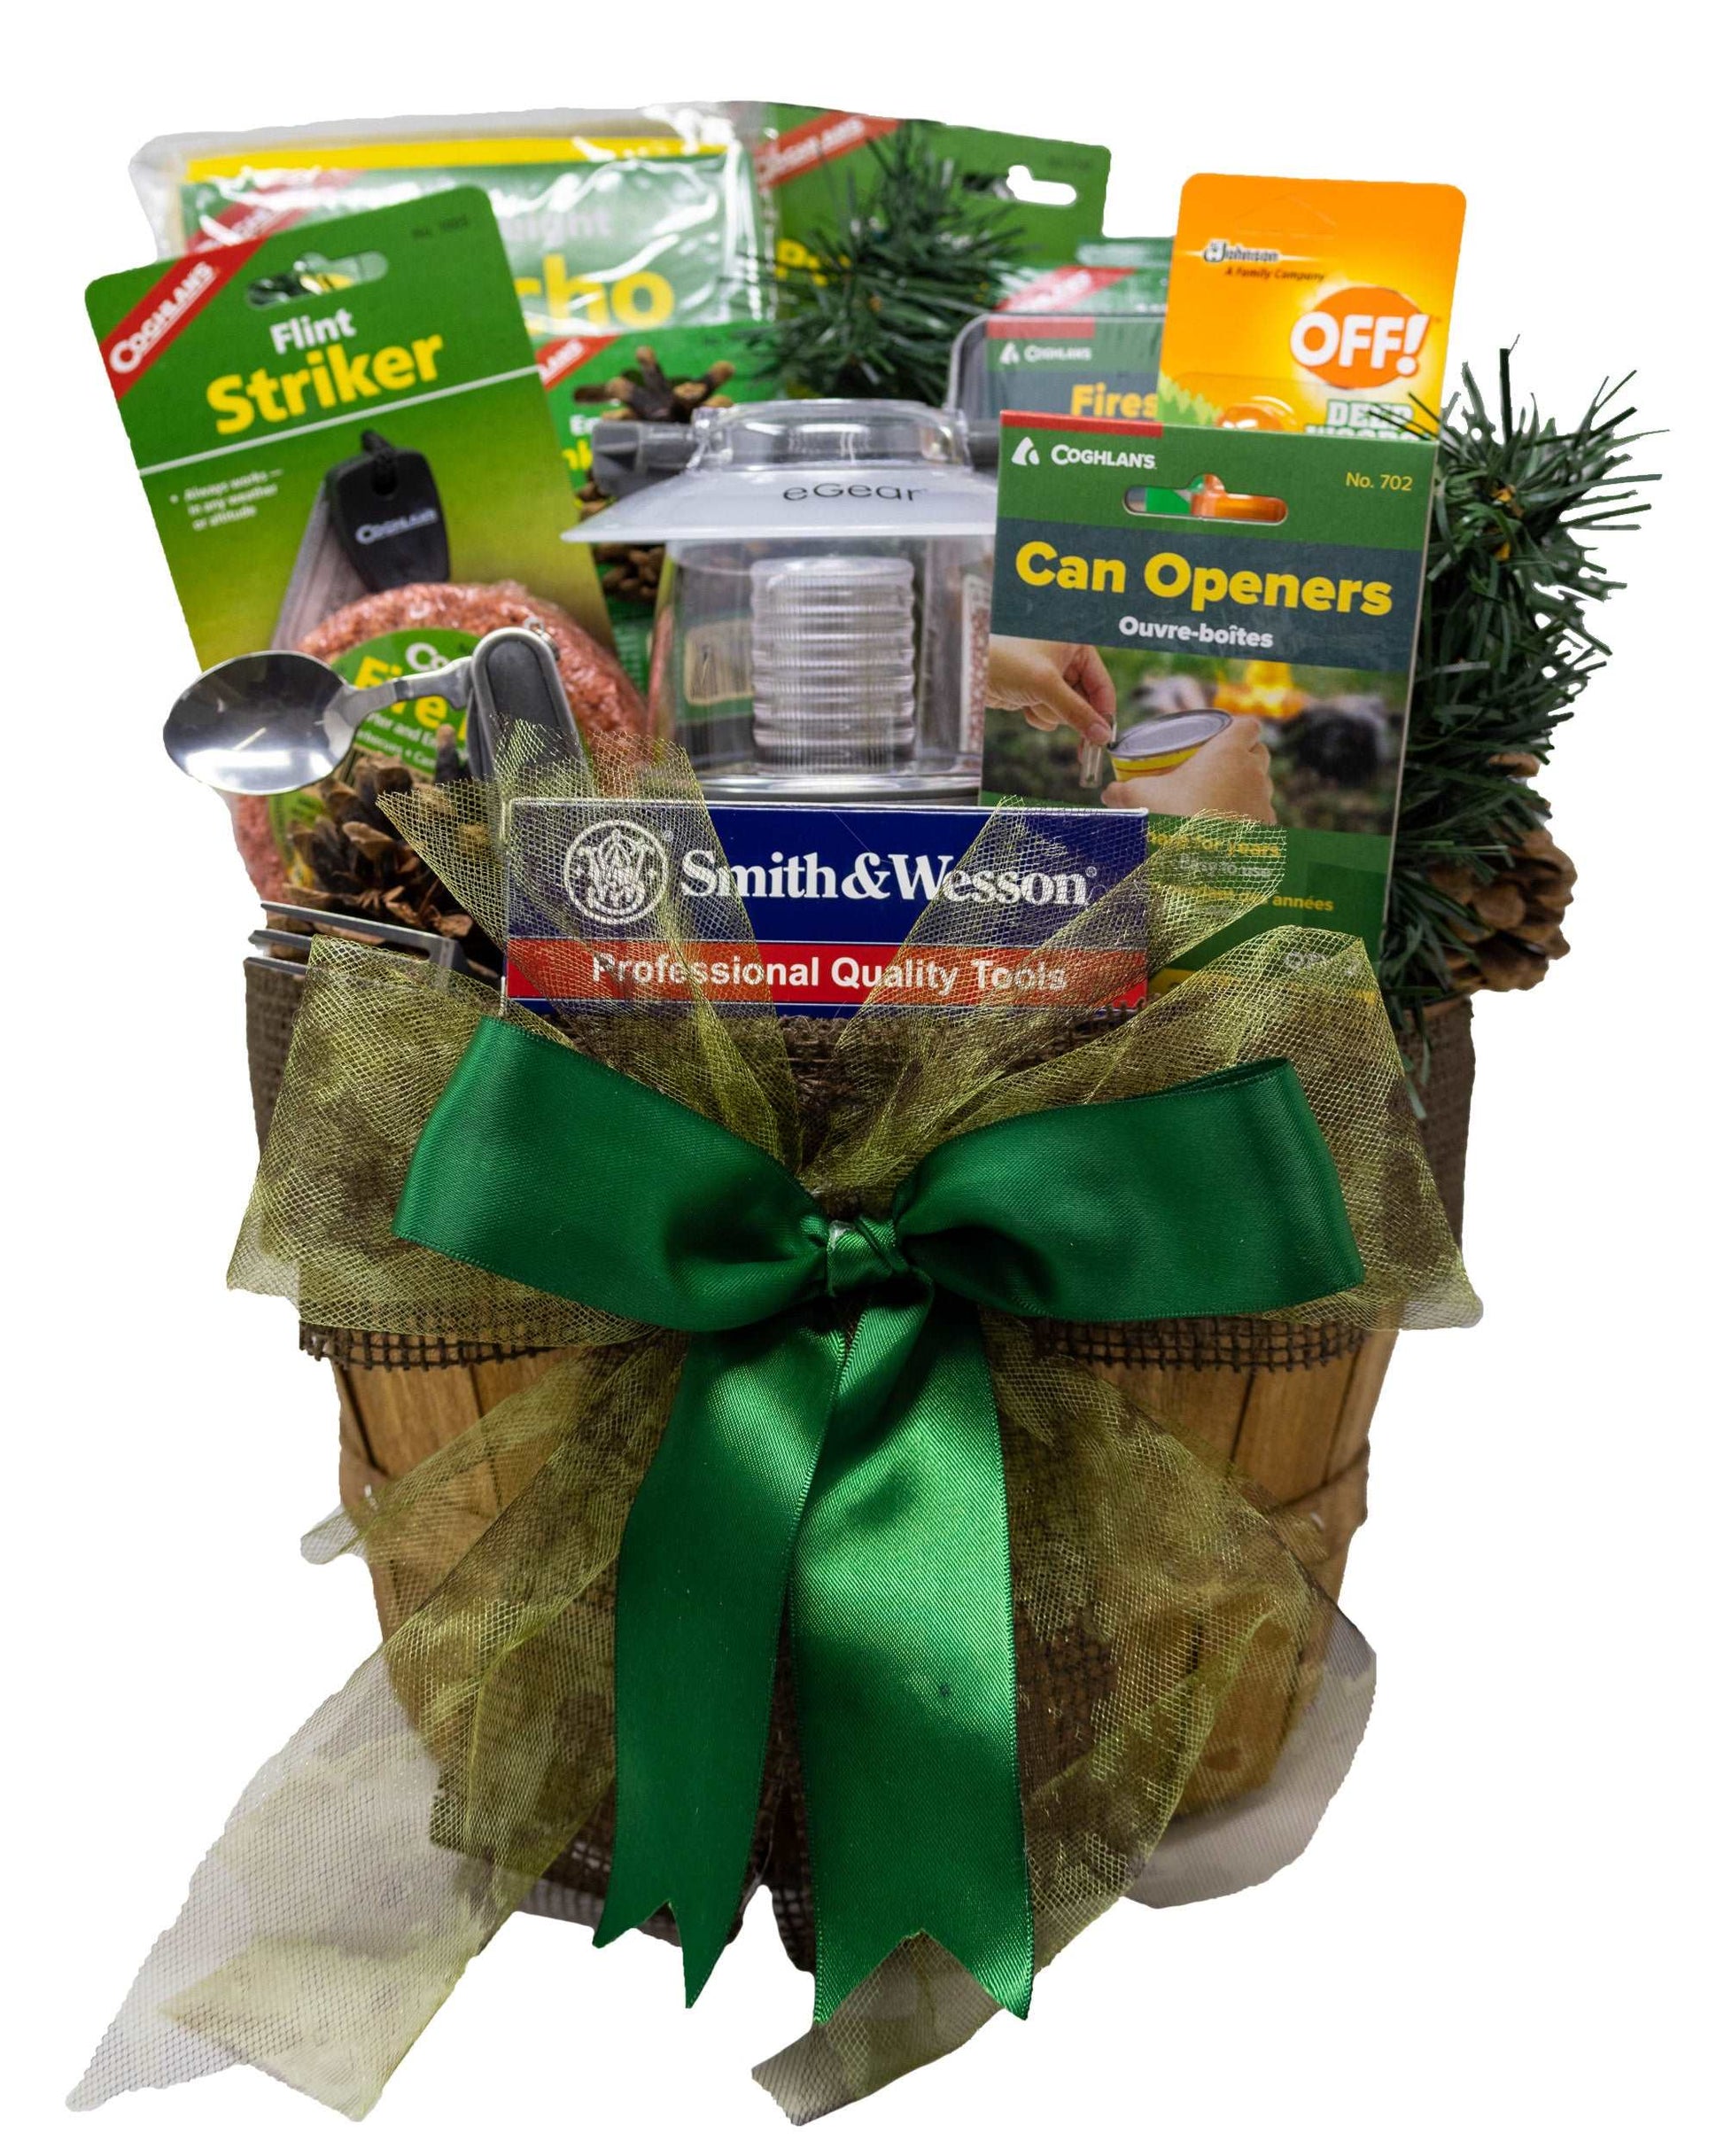 Unique and Thoughtful Golf Gift Basket Ideas